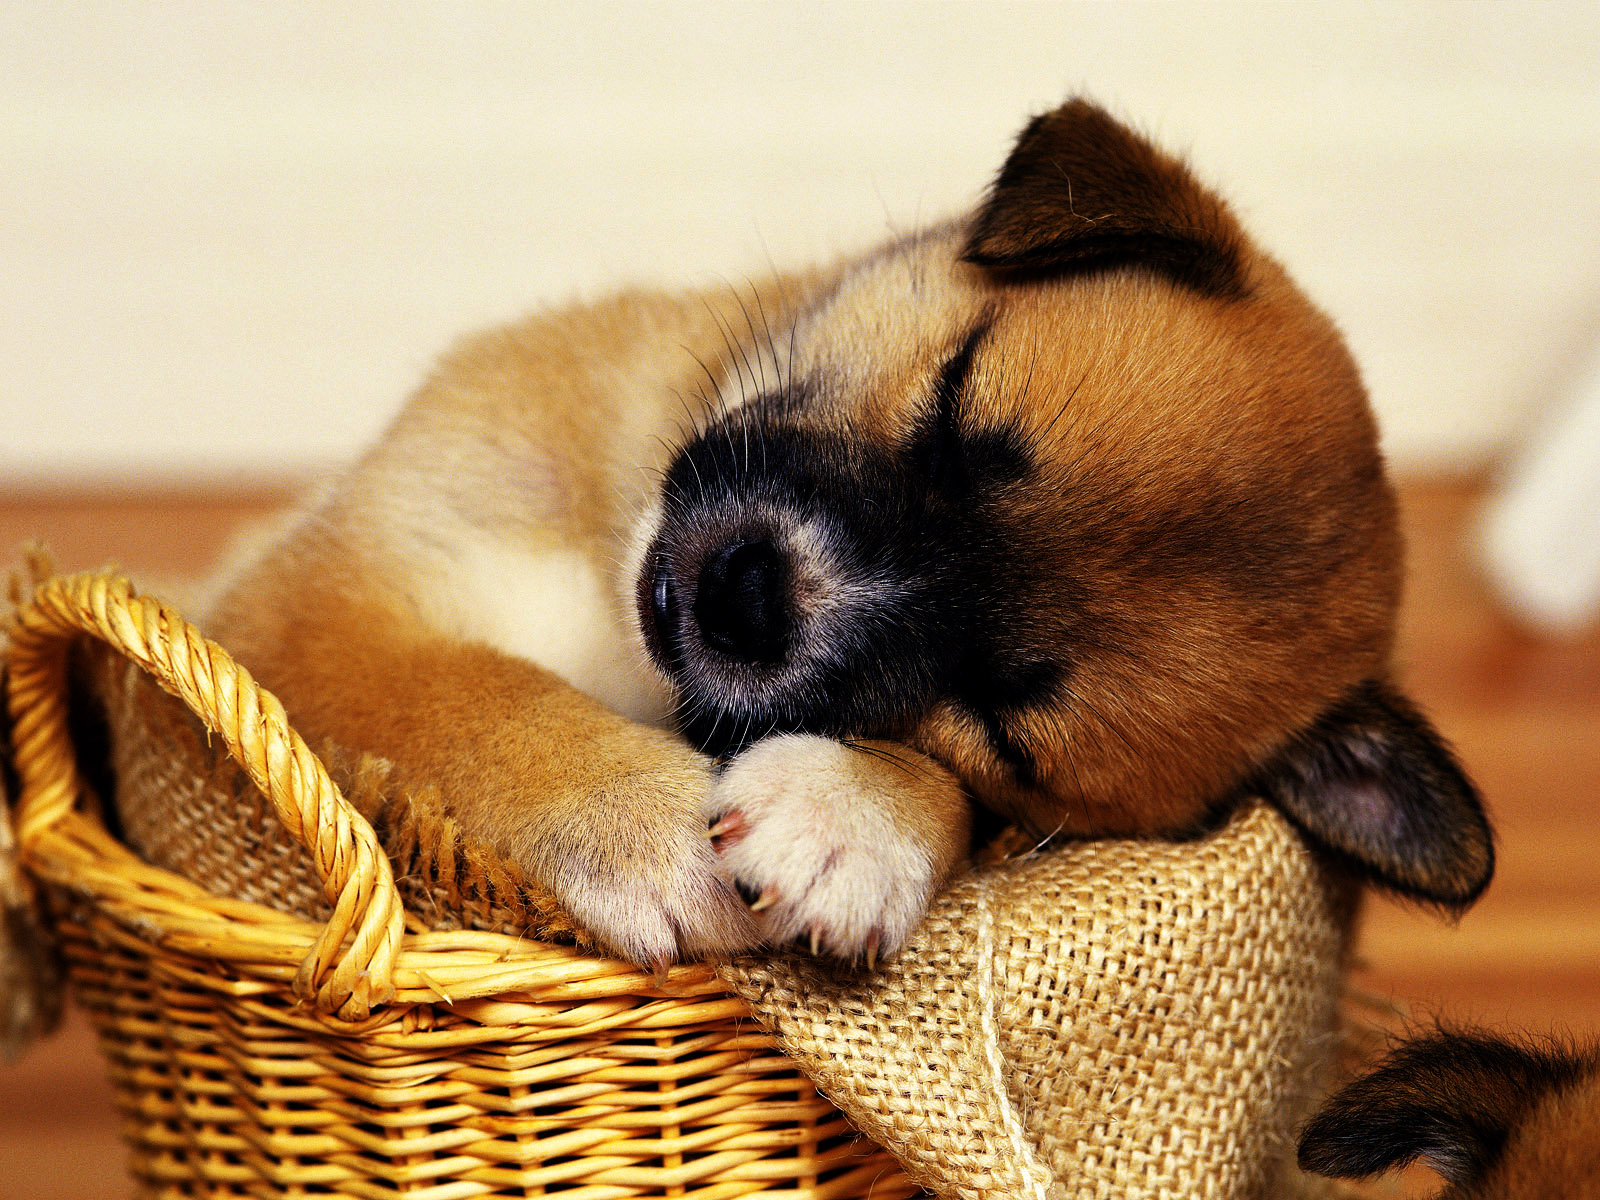 Puppies Hd Wallpapers